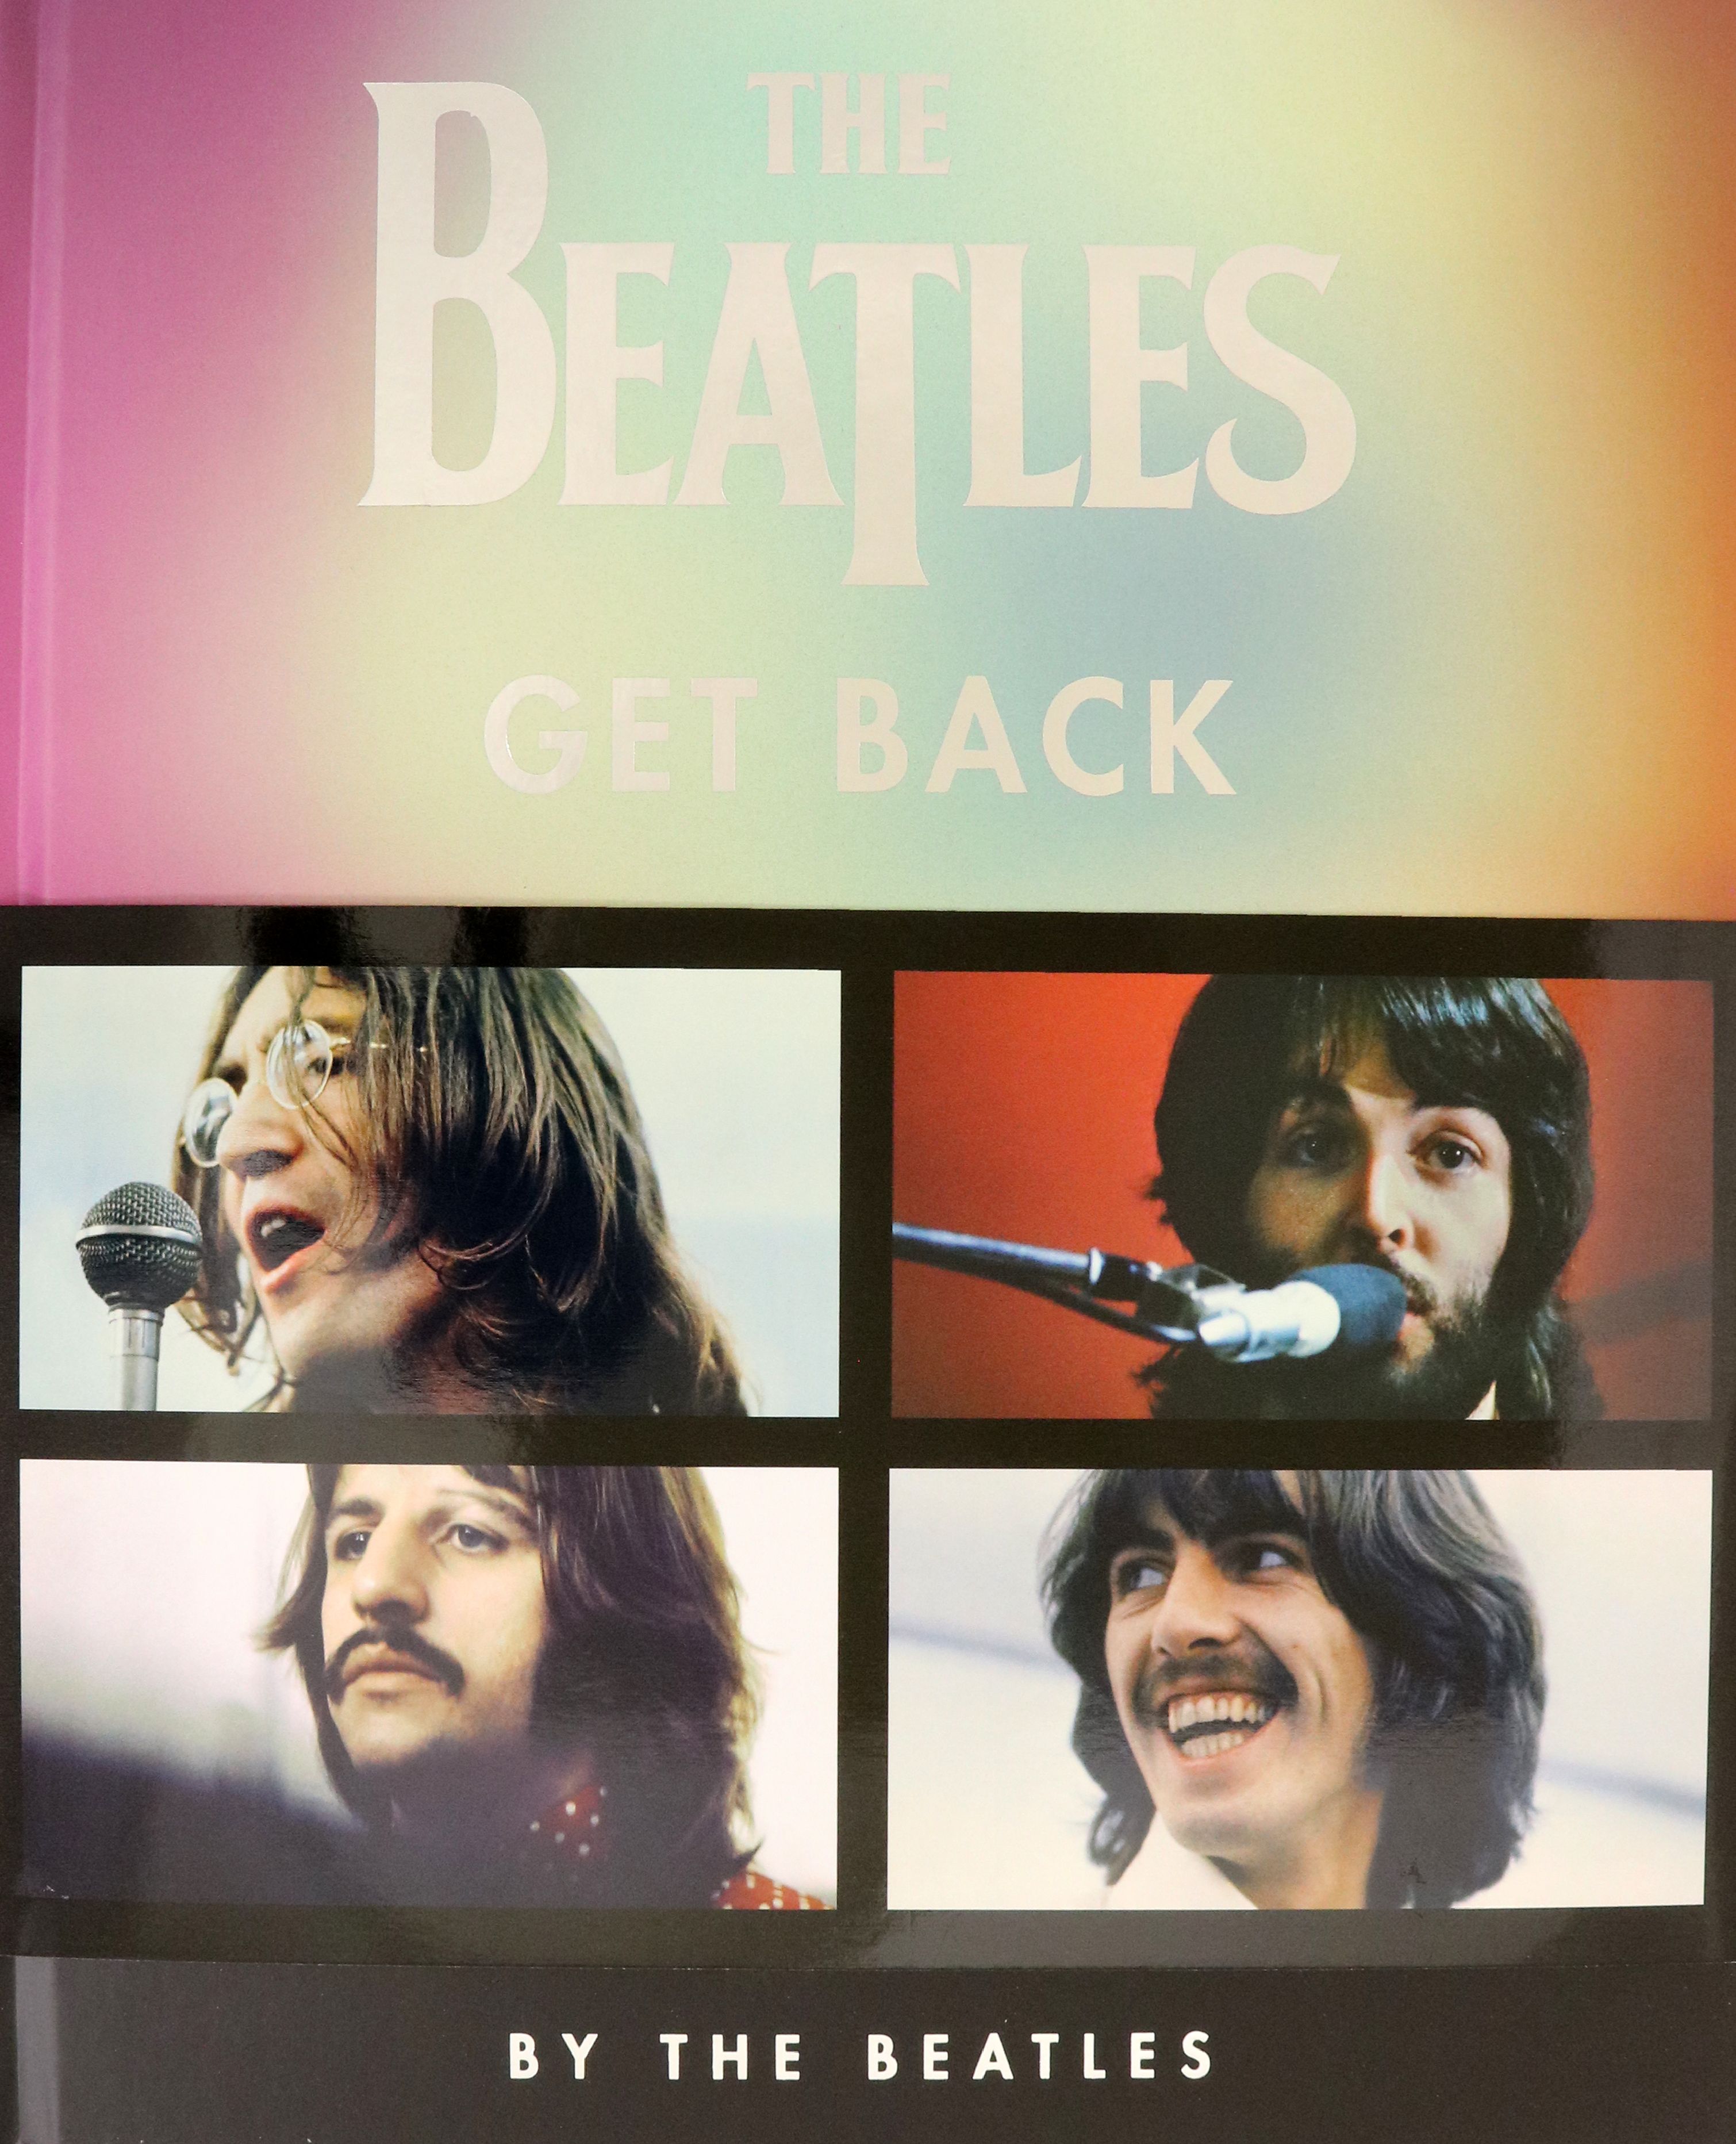 The Beatles get back. The Beatles get back 2021 poster. Get back the beatles